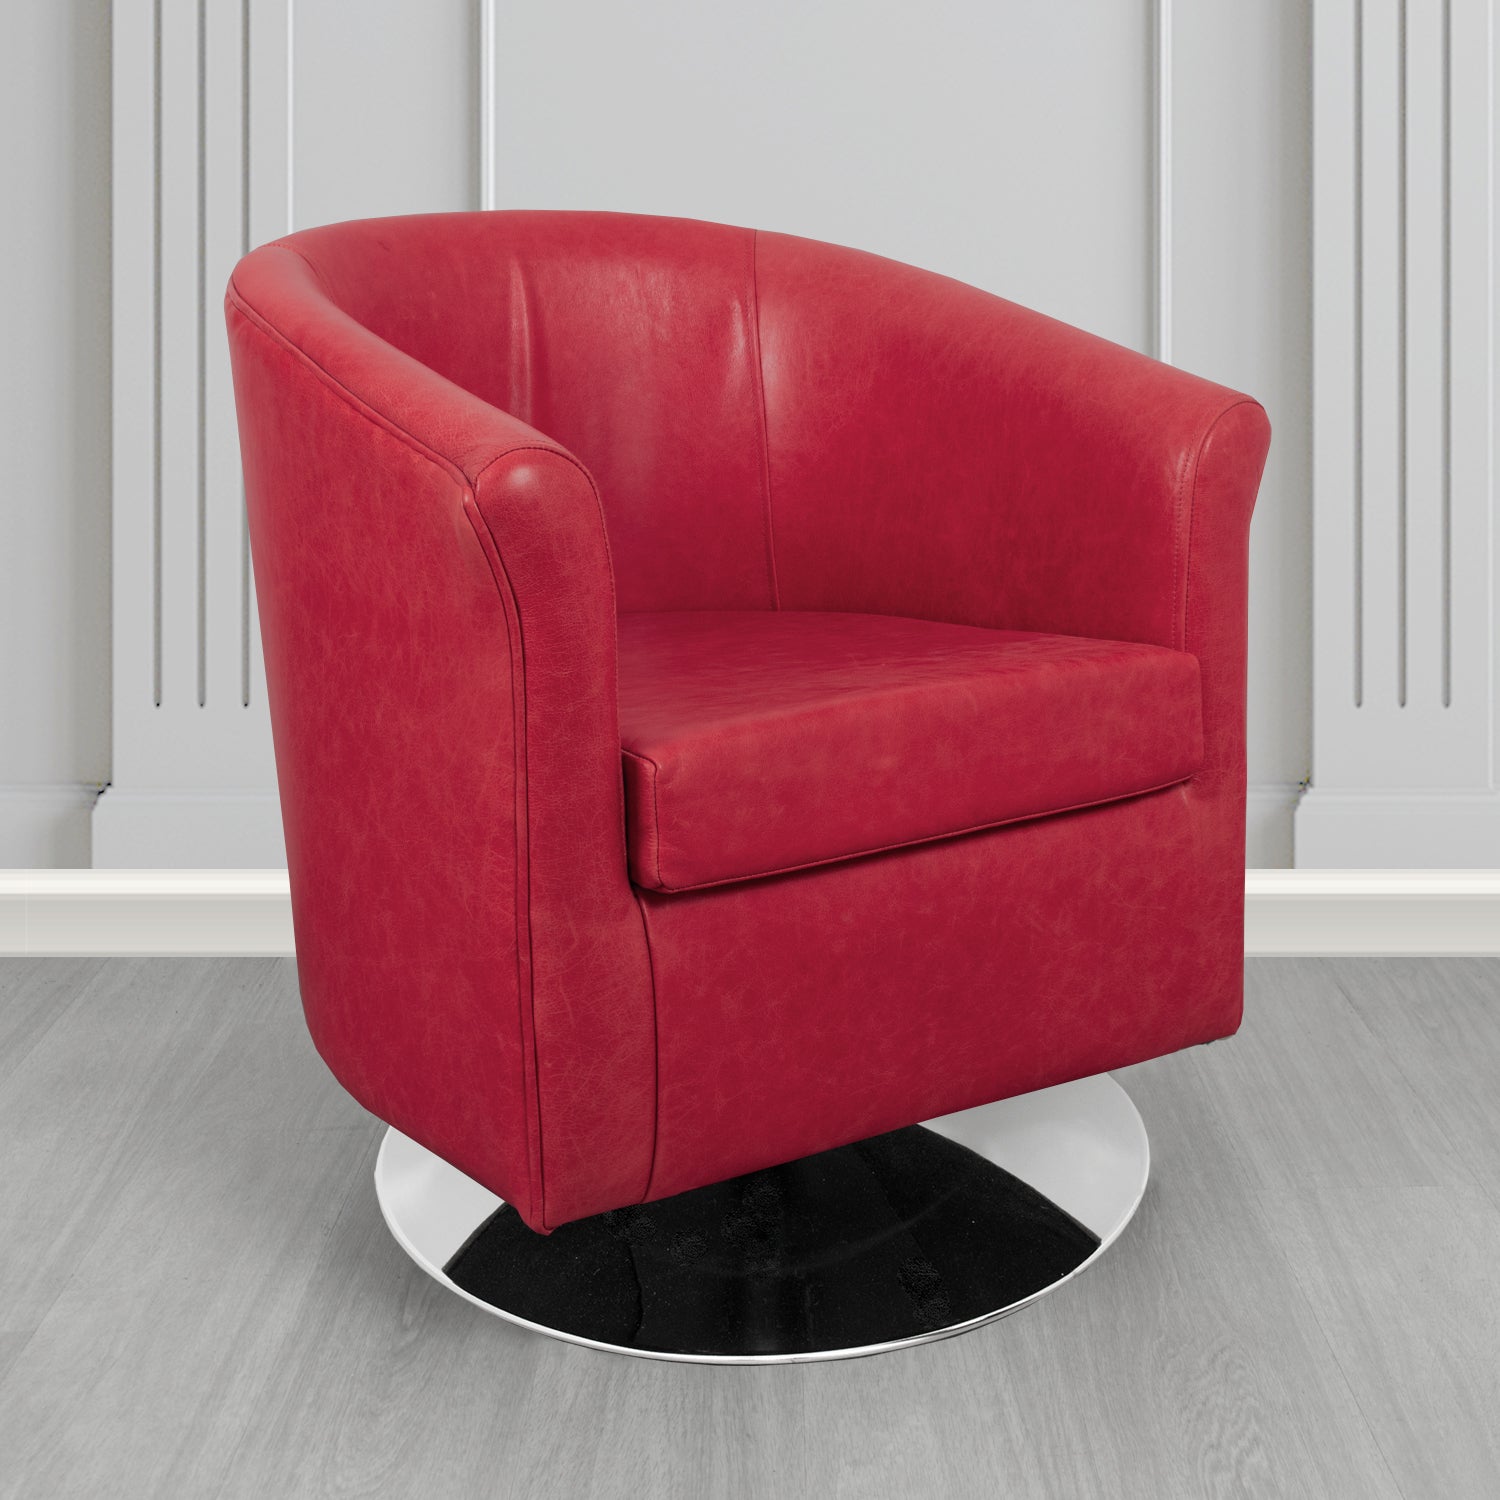 Tuscany Swivel Tub Chair in Crib 5 Old English Gamay Genuine Leather - The Tub Chair Shop